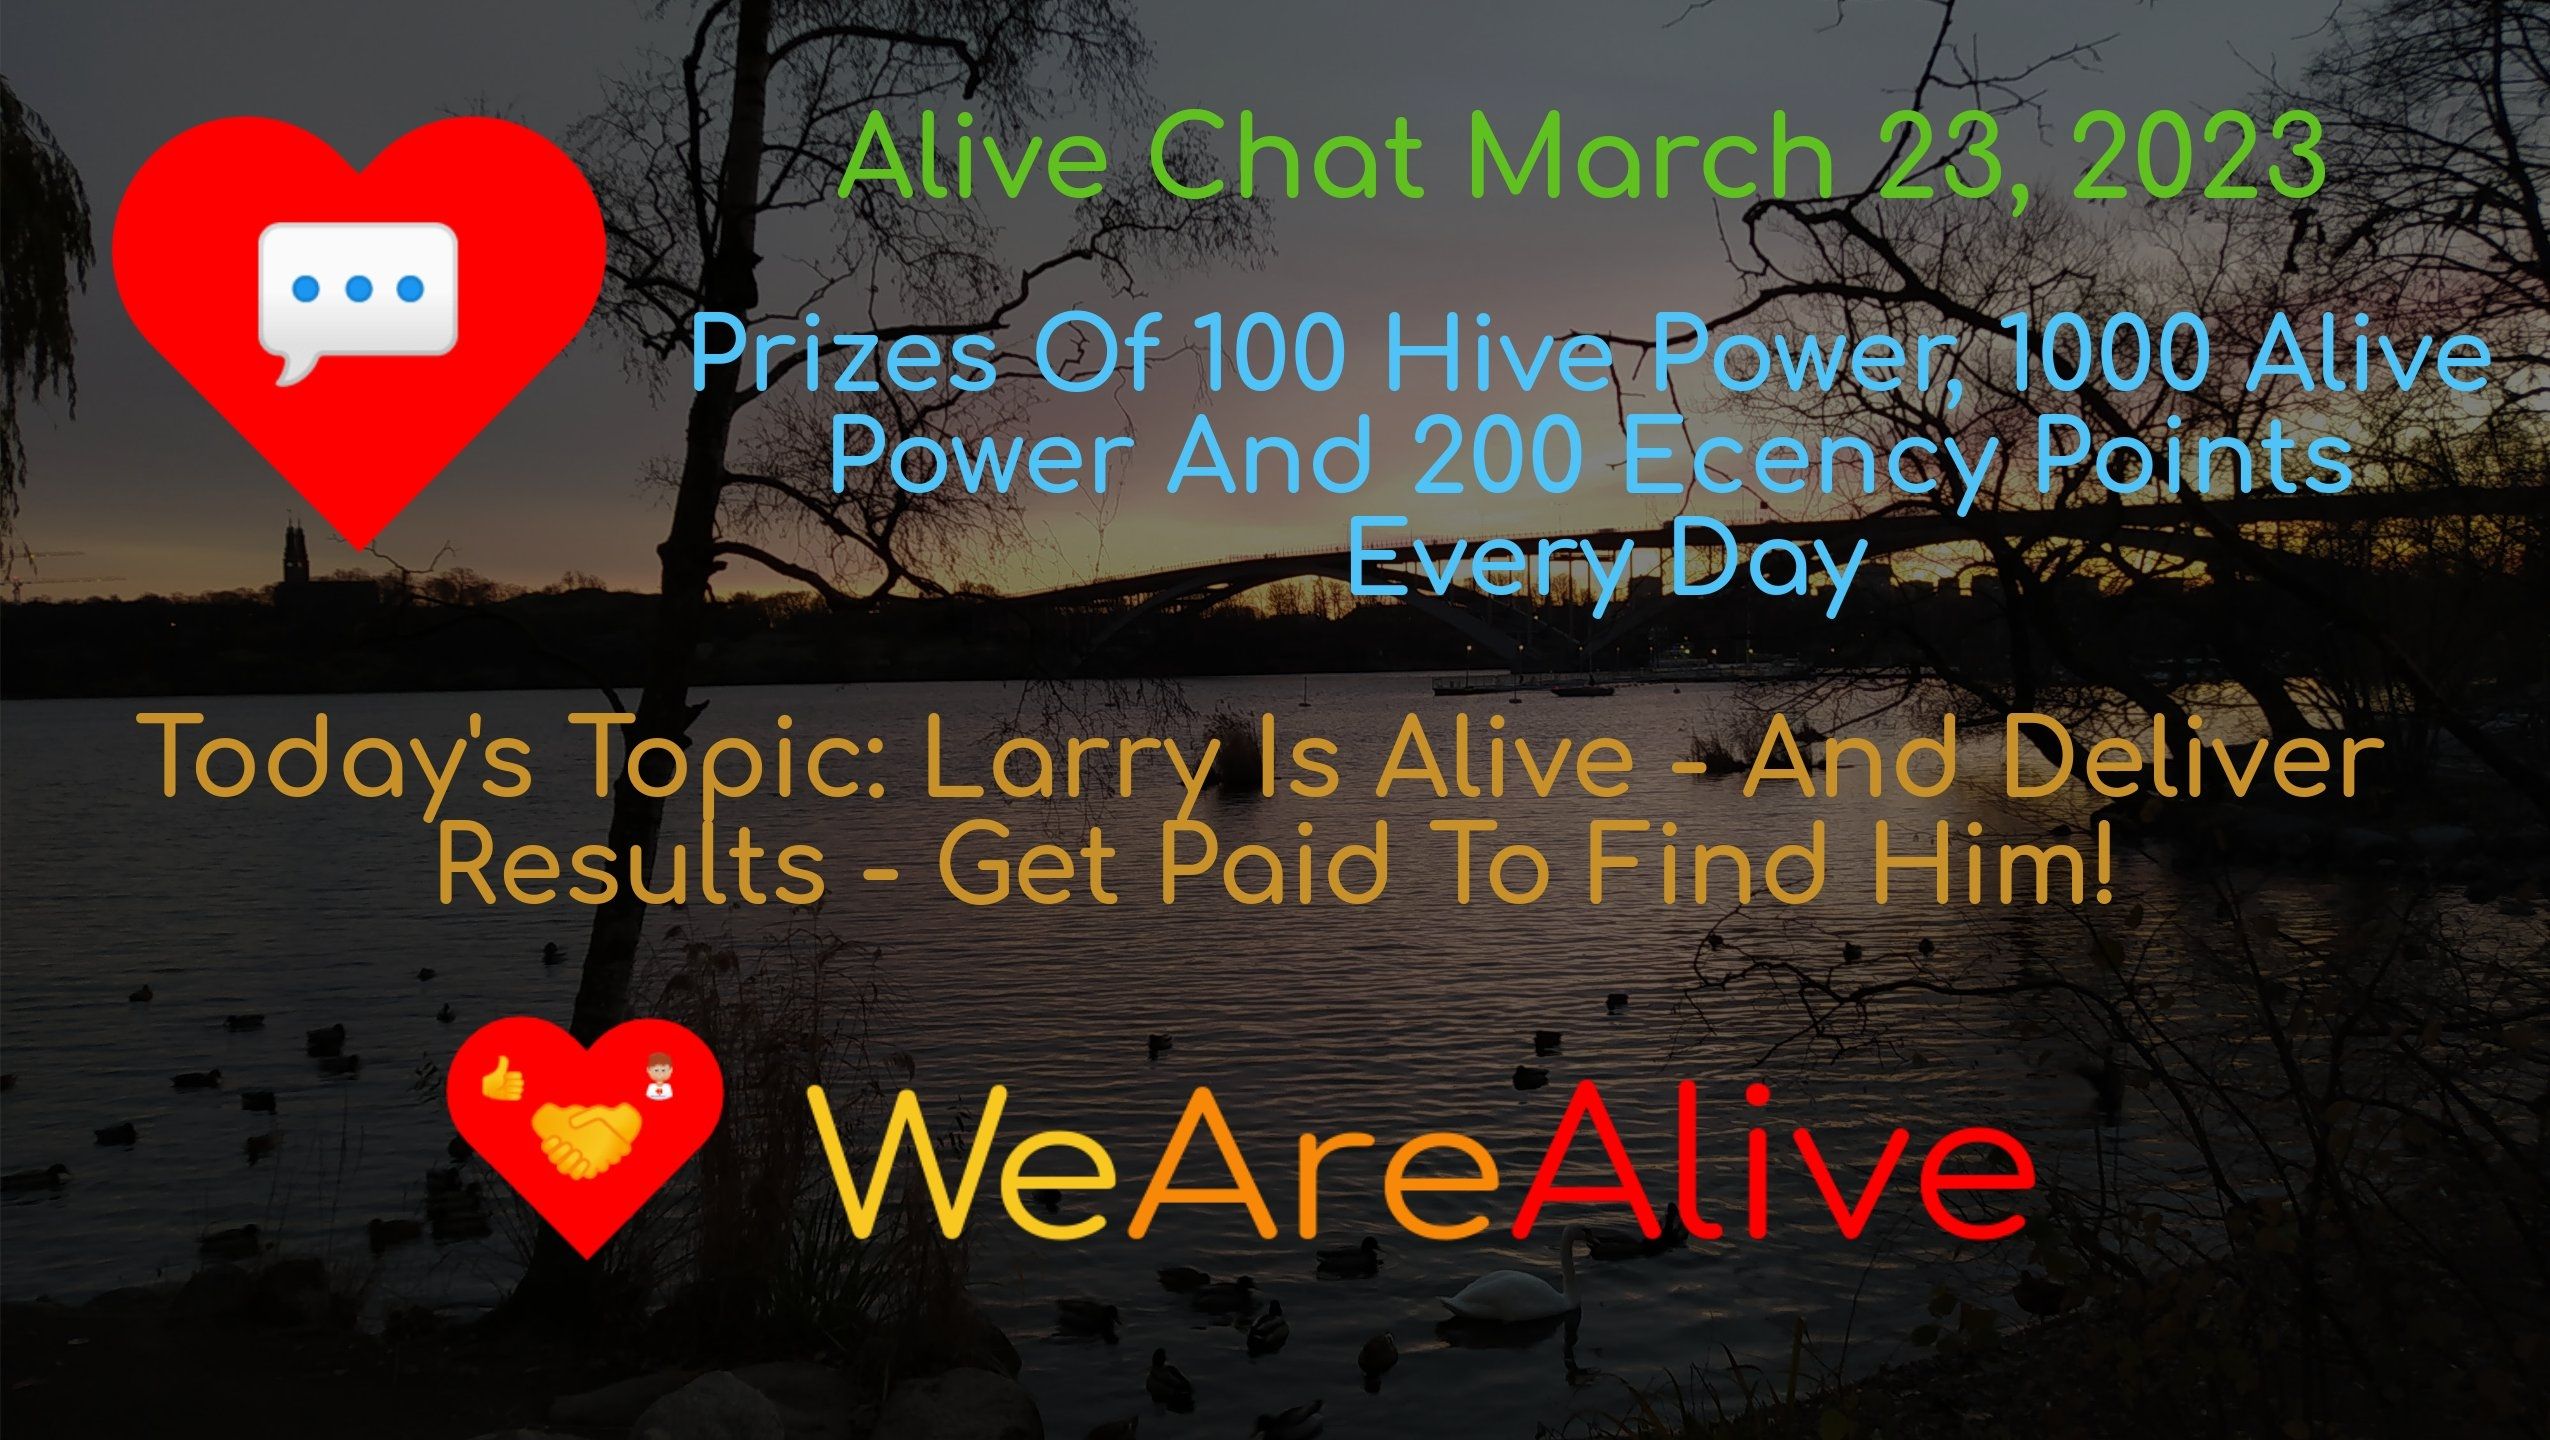 @alive.chat/alive-chat-march-23-2023